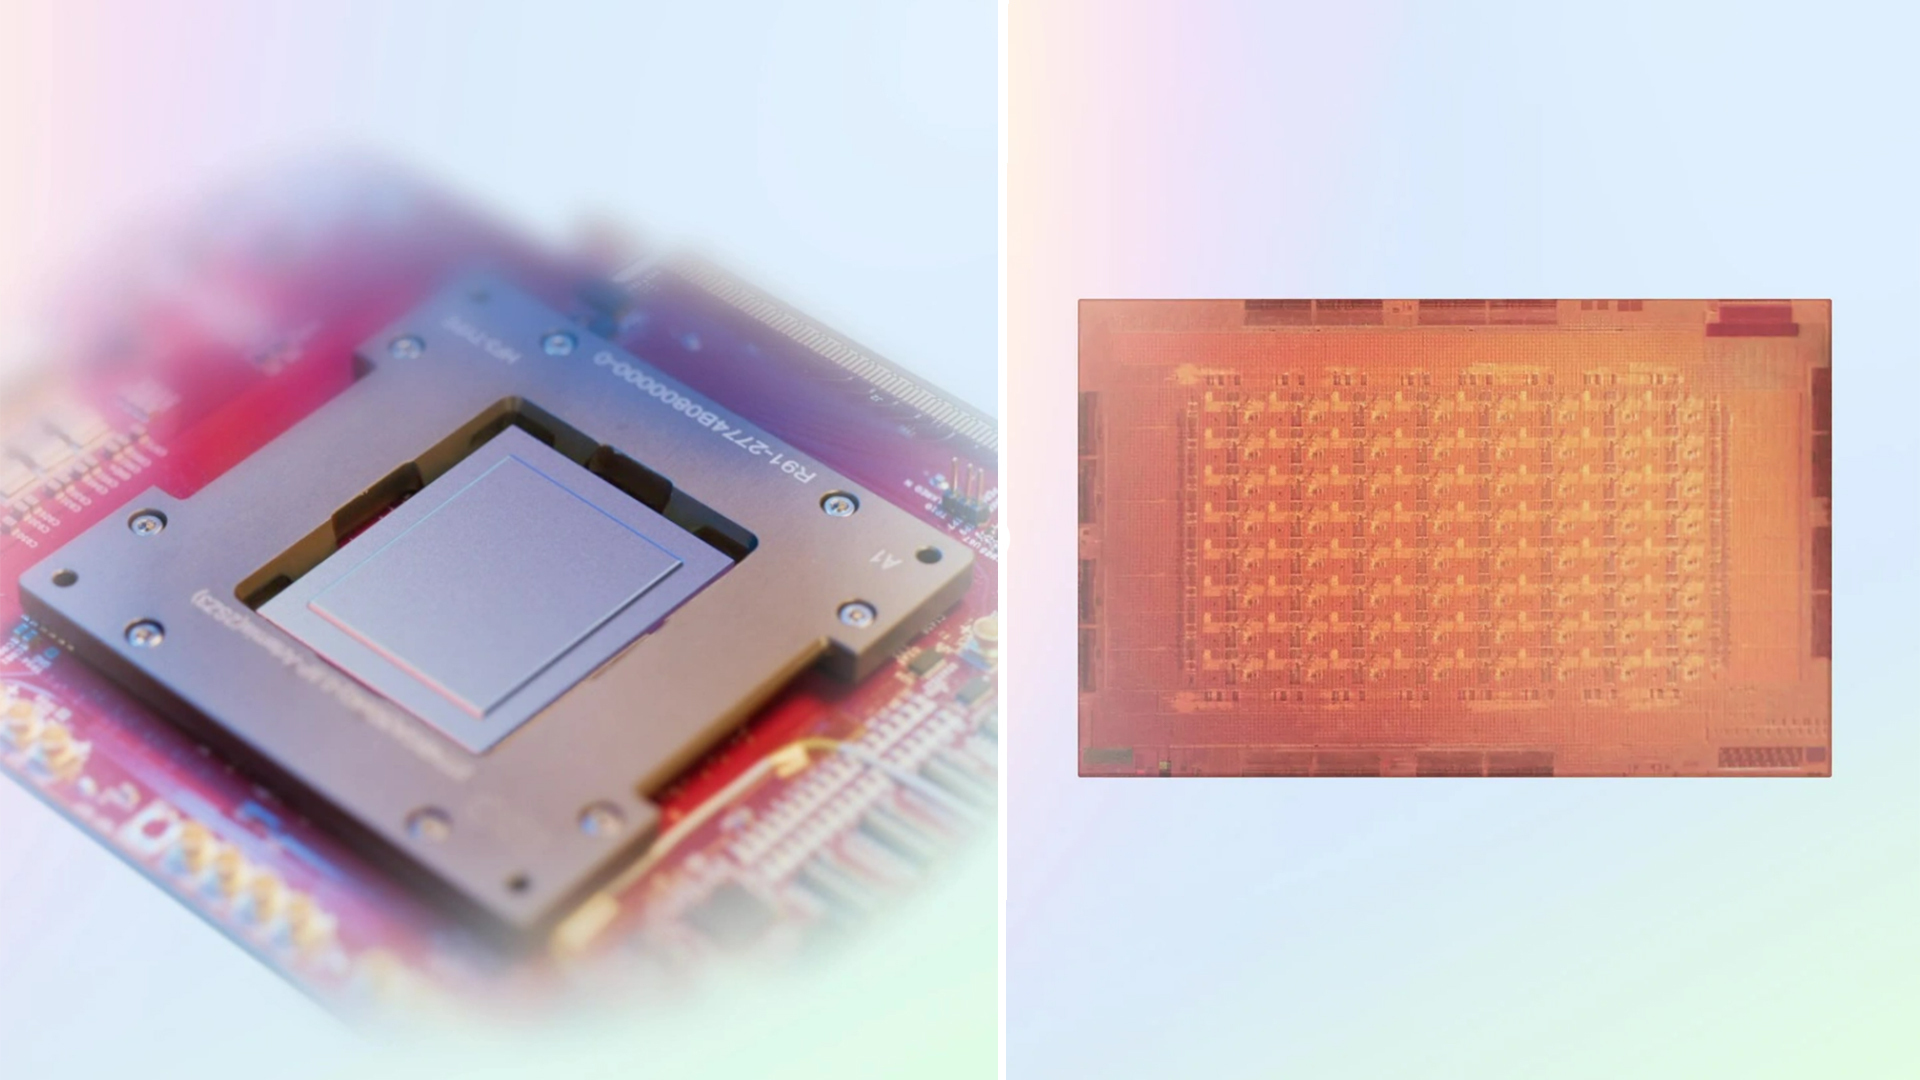 Meta challenges Nvidias dominance with new AI chips [Video]